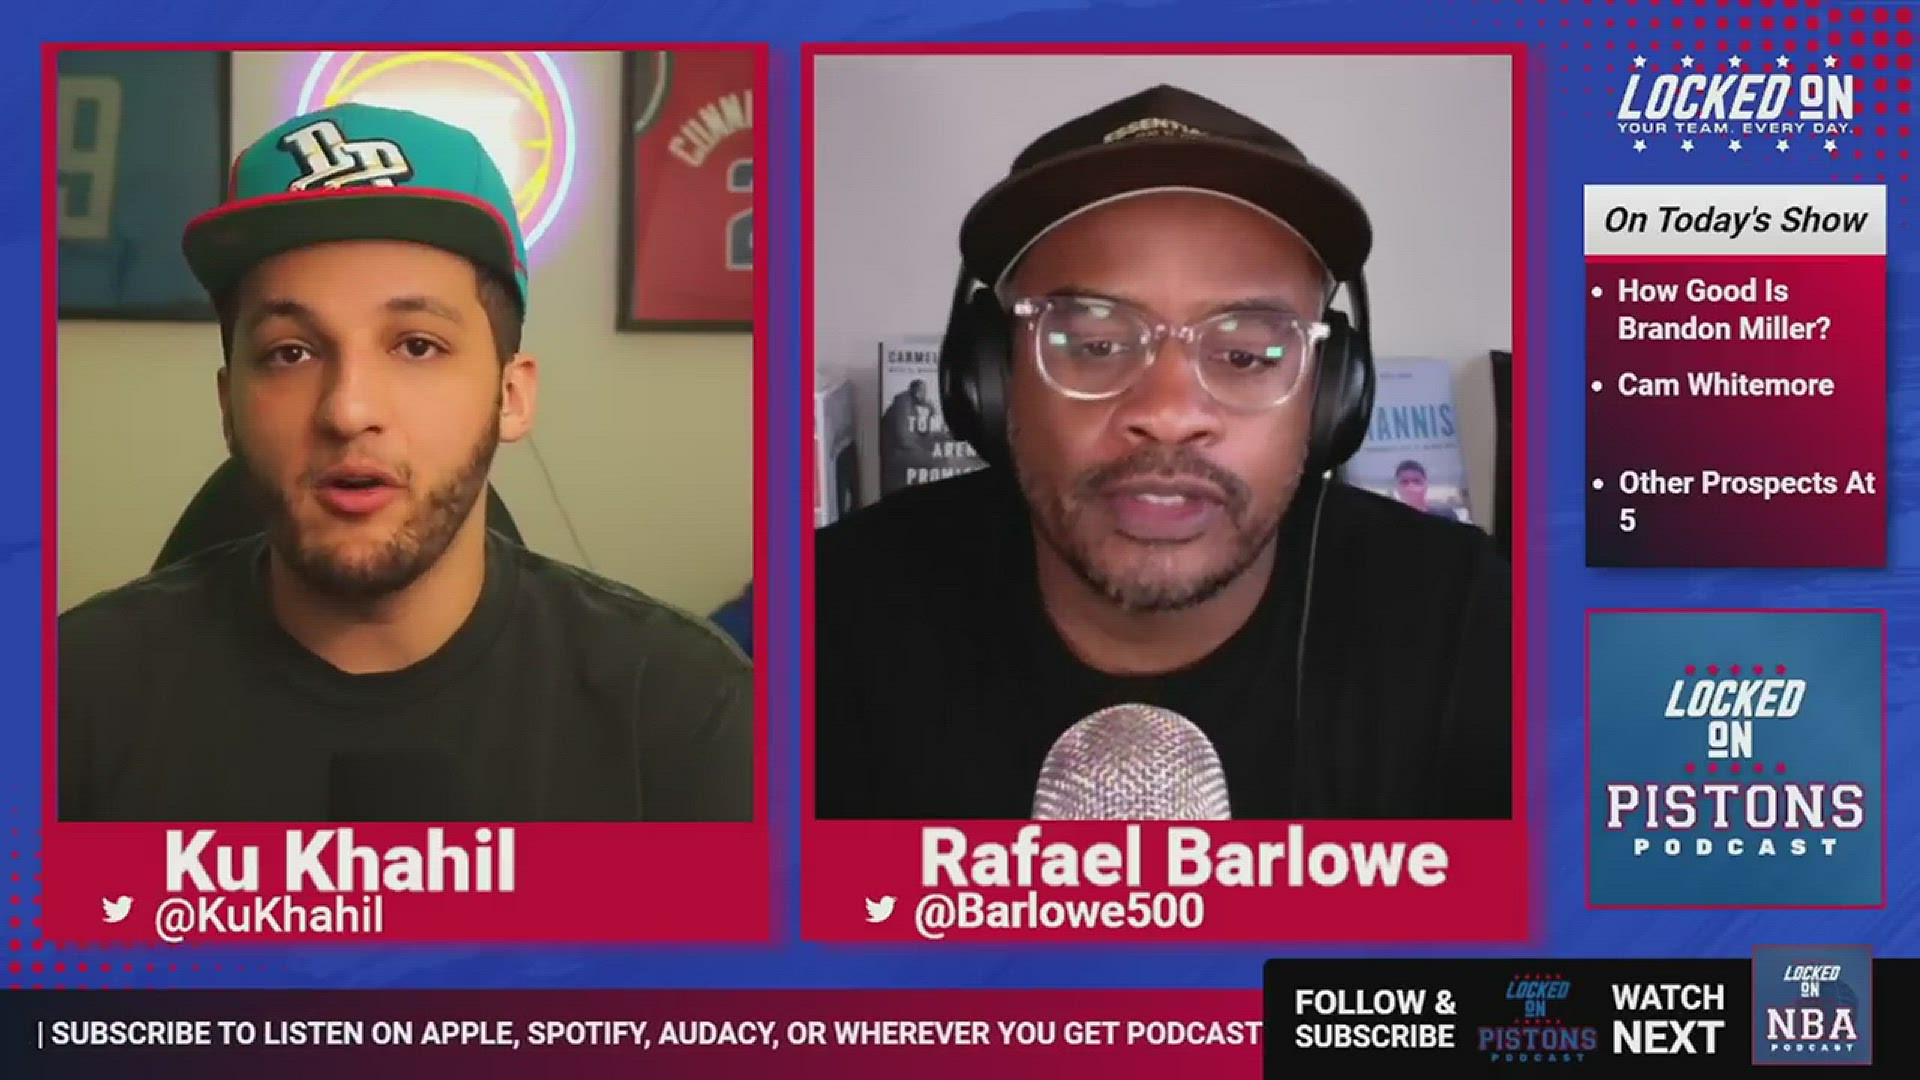 NBA Draft Scout and Director of Scouting at NBA Big Board, Rafael Barlowe joins the podcast to discuss why he's so high on Alabama's Brandon Miller.